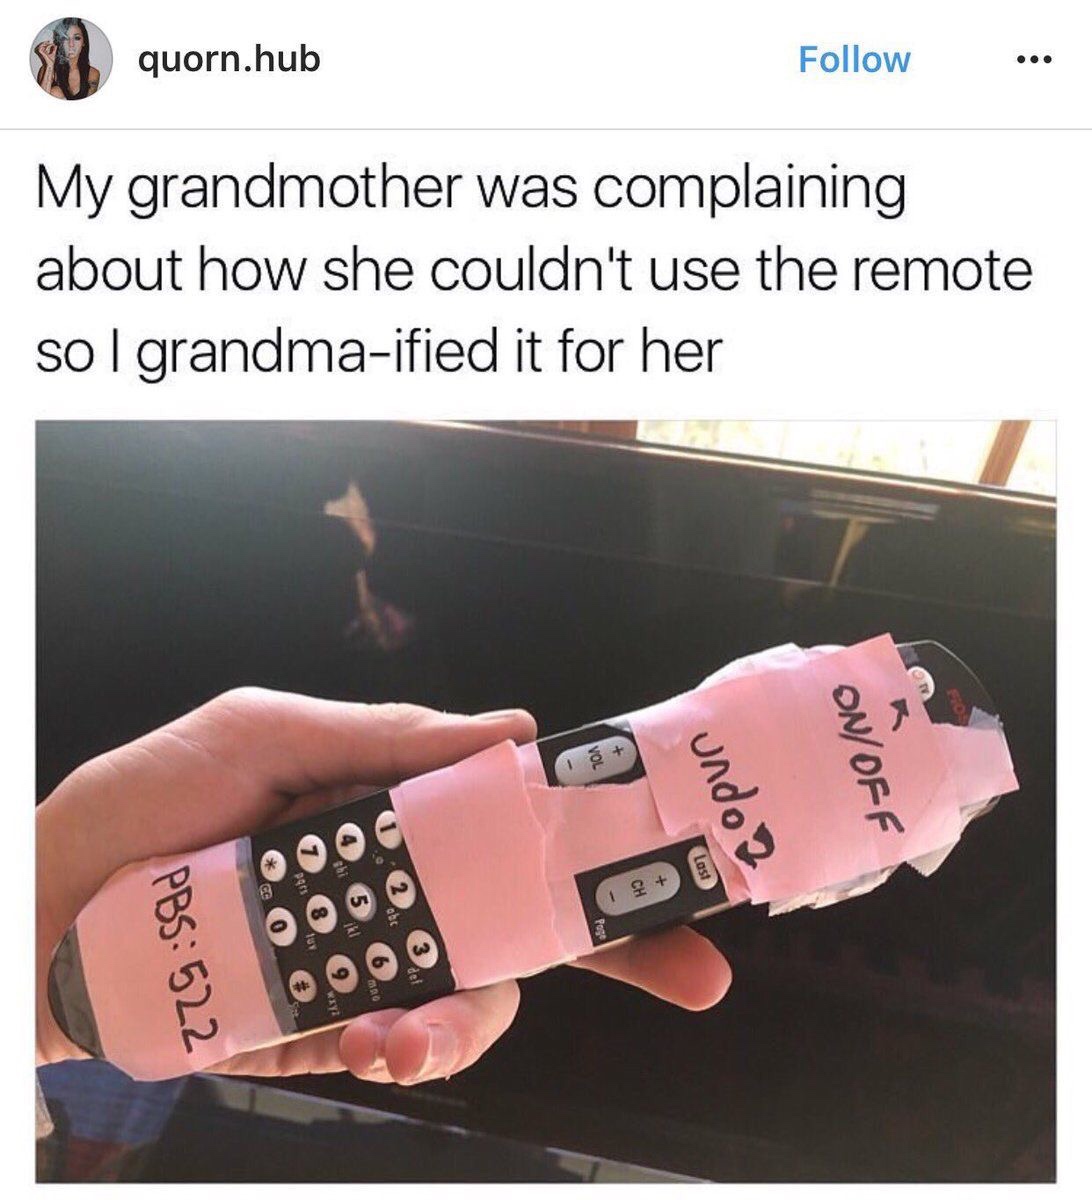 meme about remote for grandma - quorn.hub My grandmother was complaining about how she couldn't use the remote sol grandmaified it for her 18 topvn OnOff Last Pbs 522